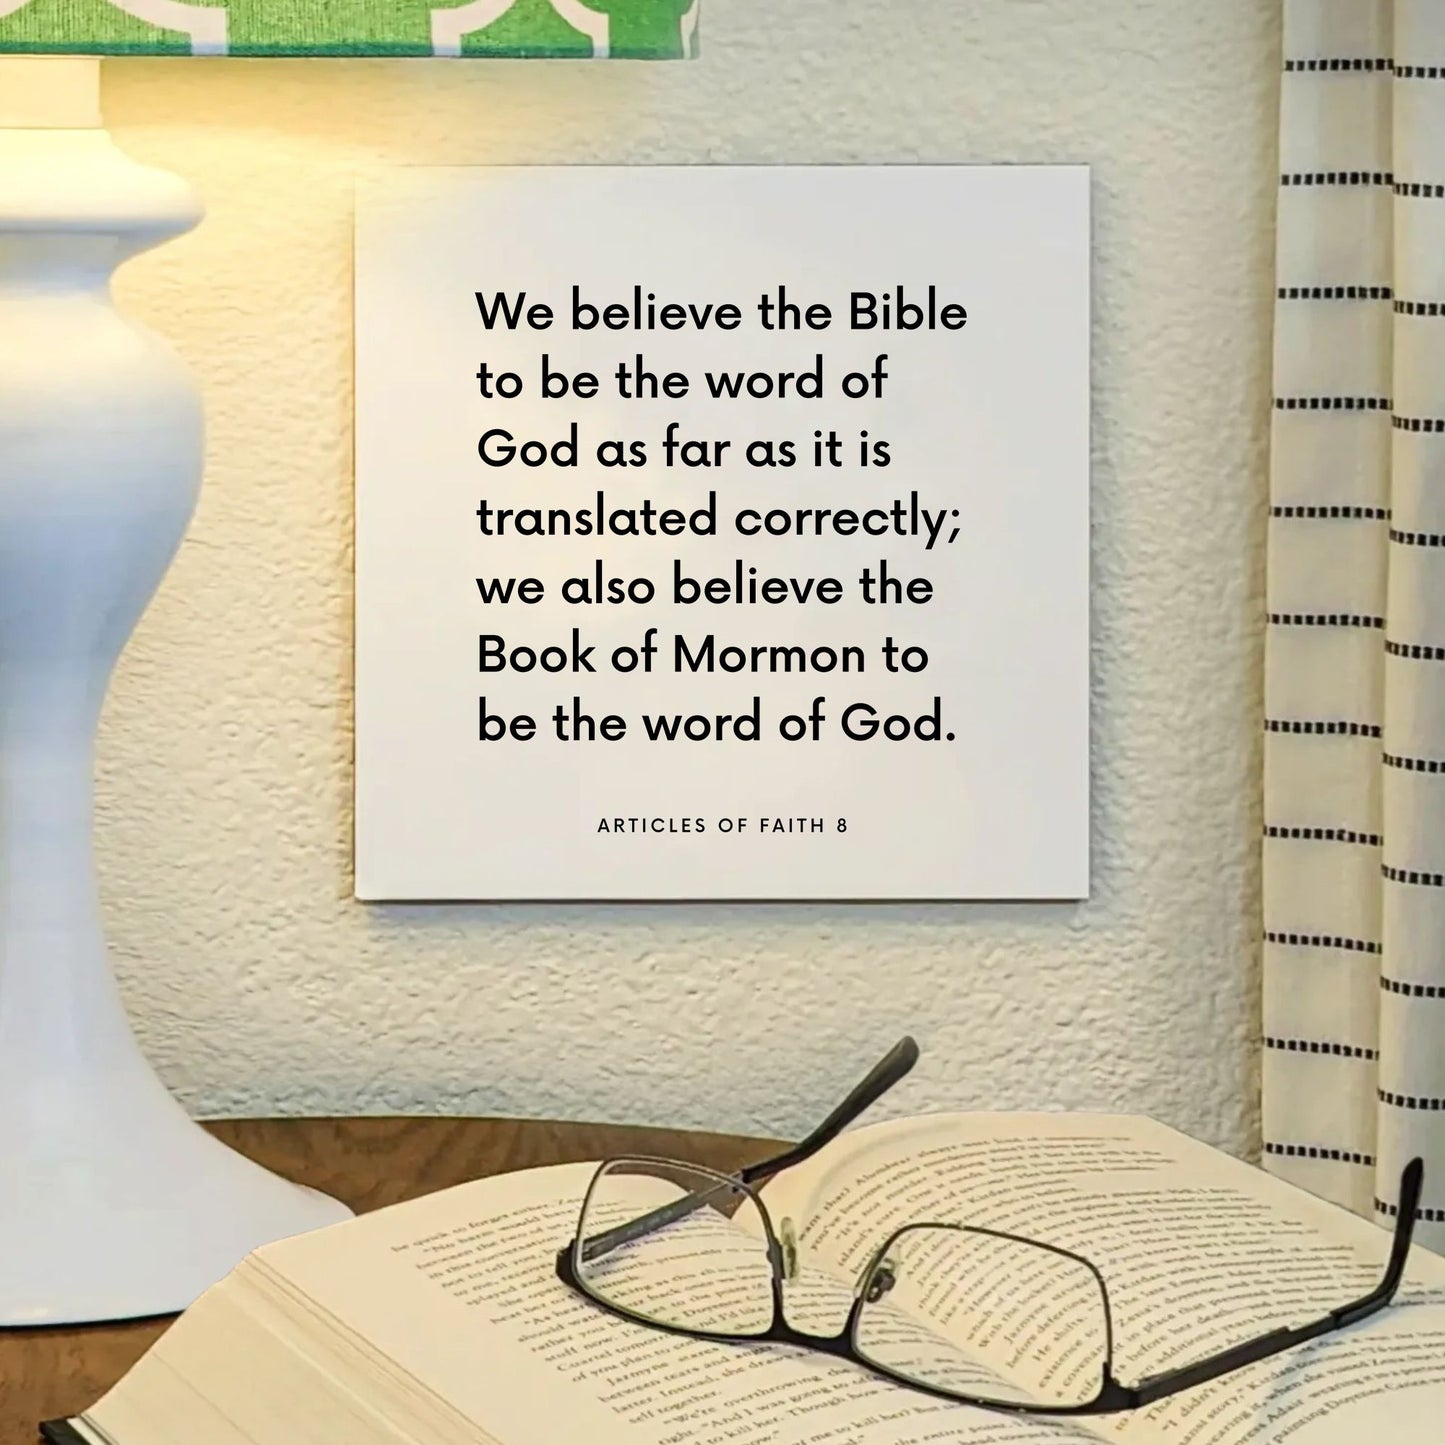 Lamp mouting of the scripture tile for Articles of Faith 8 - "We believe the Bible to be the word of God"